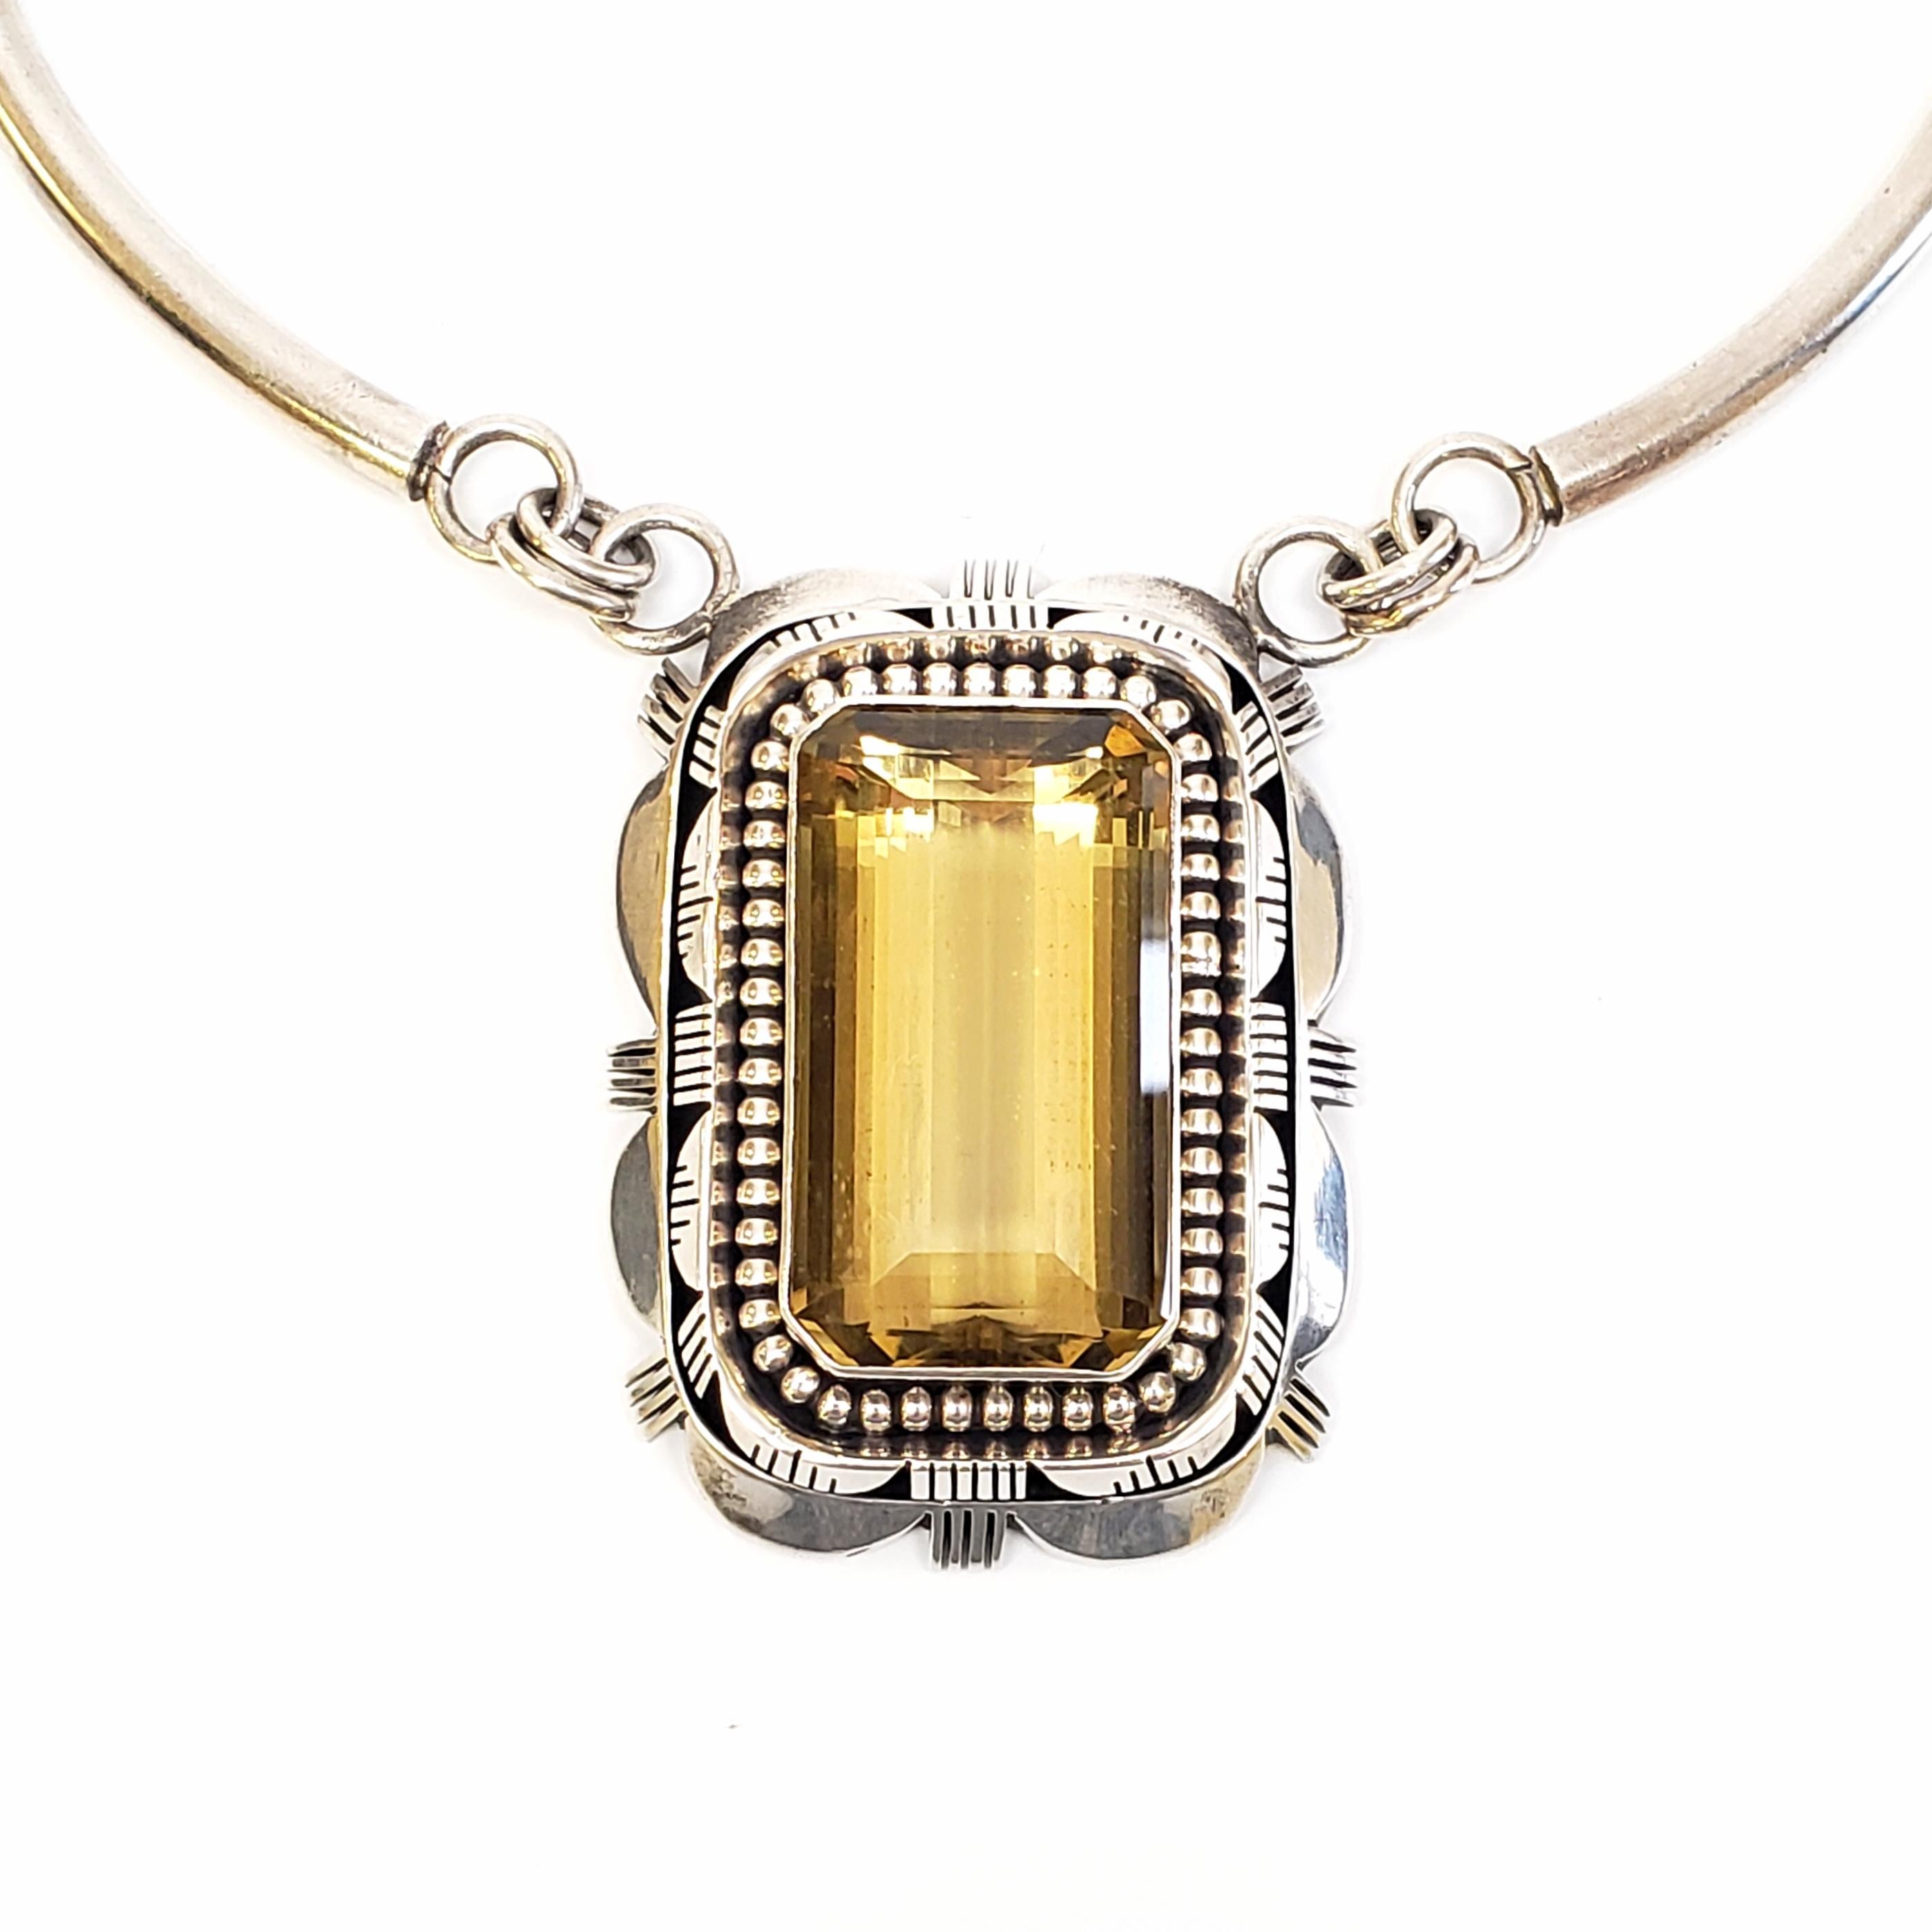 Sterling silver necklace with large citrine pendant by Native American Navajo artisan, Paul Livingston.

Paul Livingston is a highly respected silversmith known for his intricate saw work. His pieces are highly collectible. This piece features a